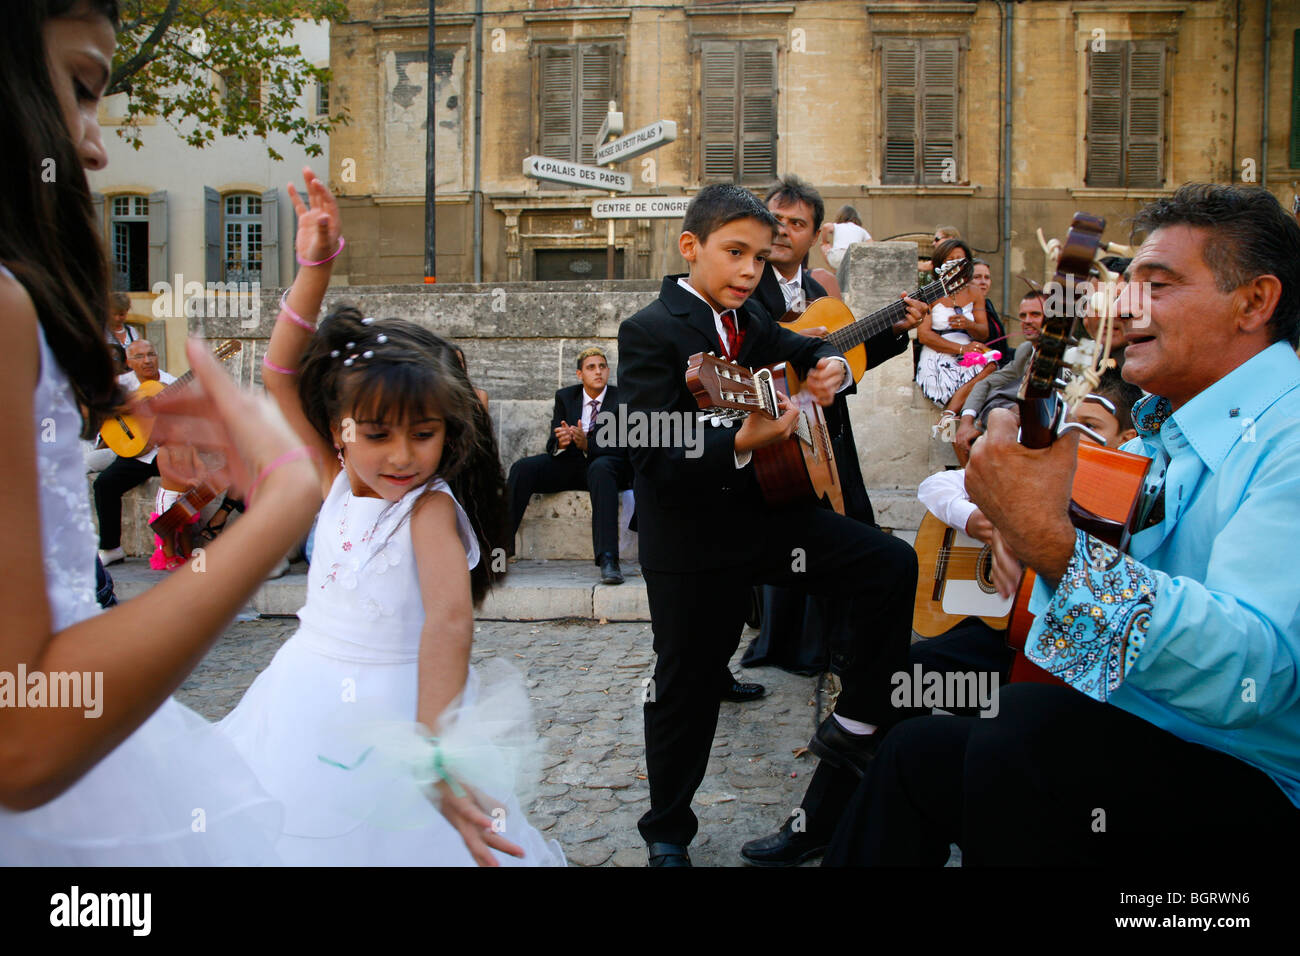 Group of Gypsies playing guitars, Avignon, Vaucluse Provence, France. Stock Photo